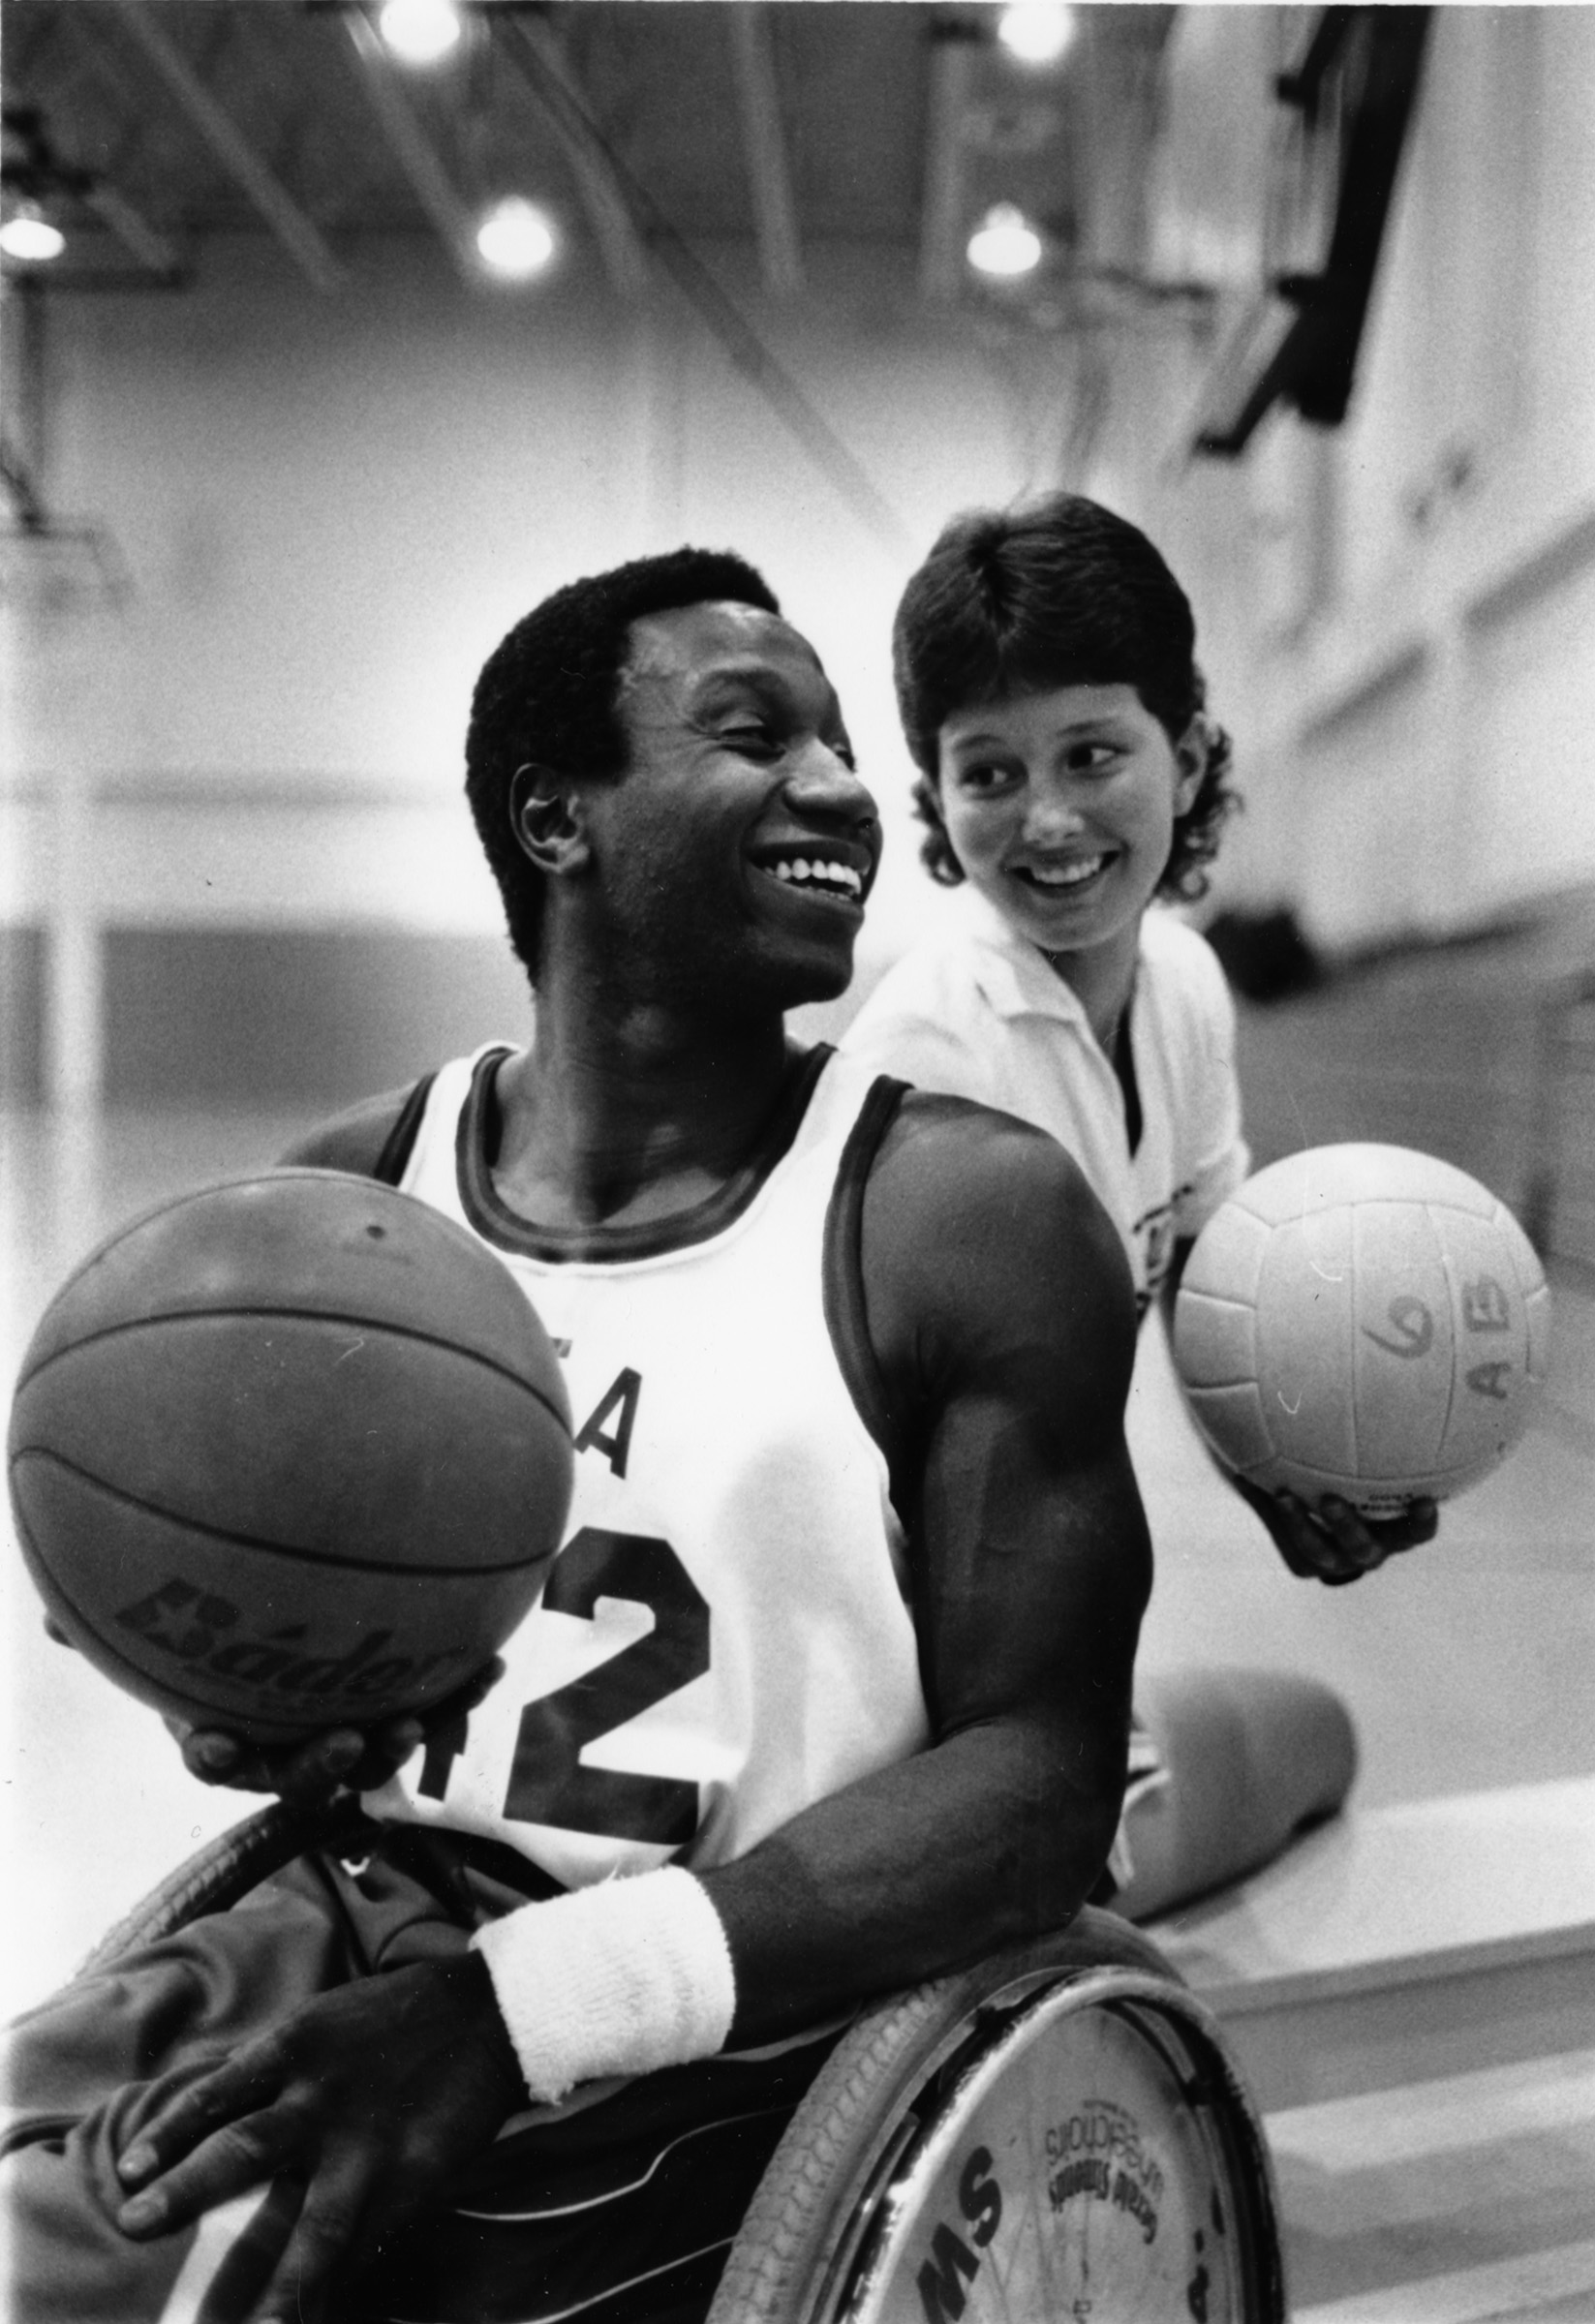 Black and white photo of two people, man on left holding a basketball while seated in a wheelchair, and woman at right holding a volleyball. They are looking at each other.